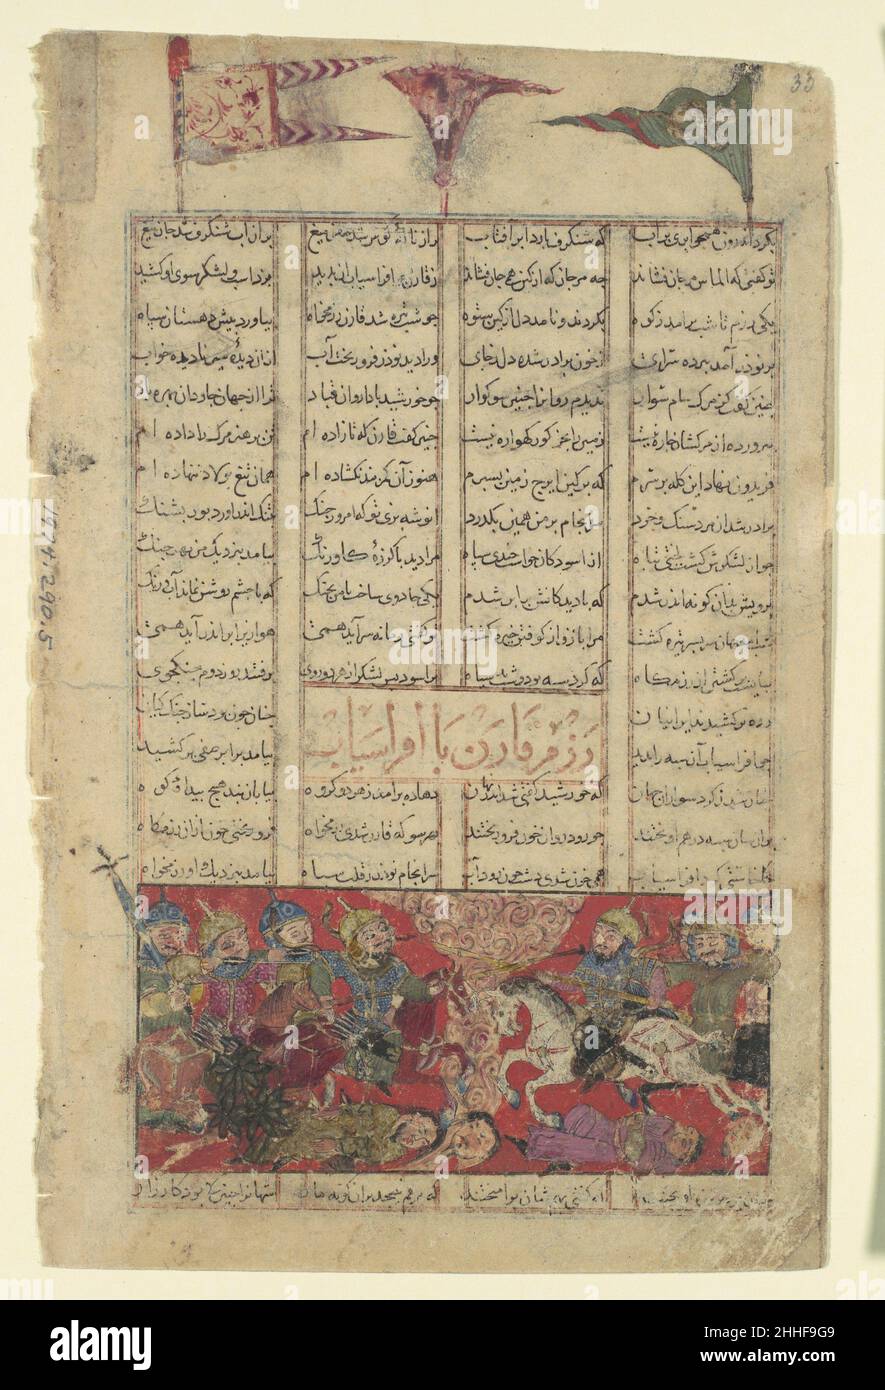 'The Combat of Qaran and Afrasiyab', Folio from a Shahnama (Book of Kings) ca. 1330–40 Abu'l Qasim Firdausi Much of the Shahnama describes stirring battles between the Turanians and the Iranians and their leaders. Each chief had his own battle standard, as indicated here at the top of the picture.. 'The Combat of Qaran and Afrasiyab', Folio from a Shahnama (Book of Kings)  452630 Stock Photo